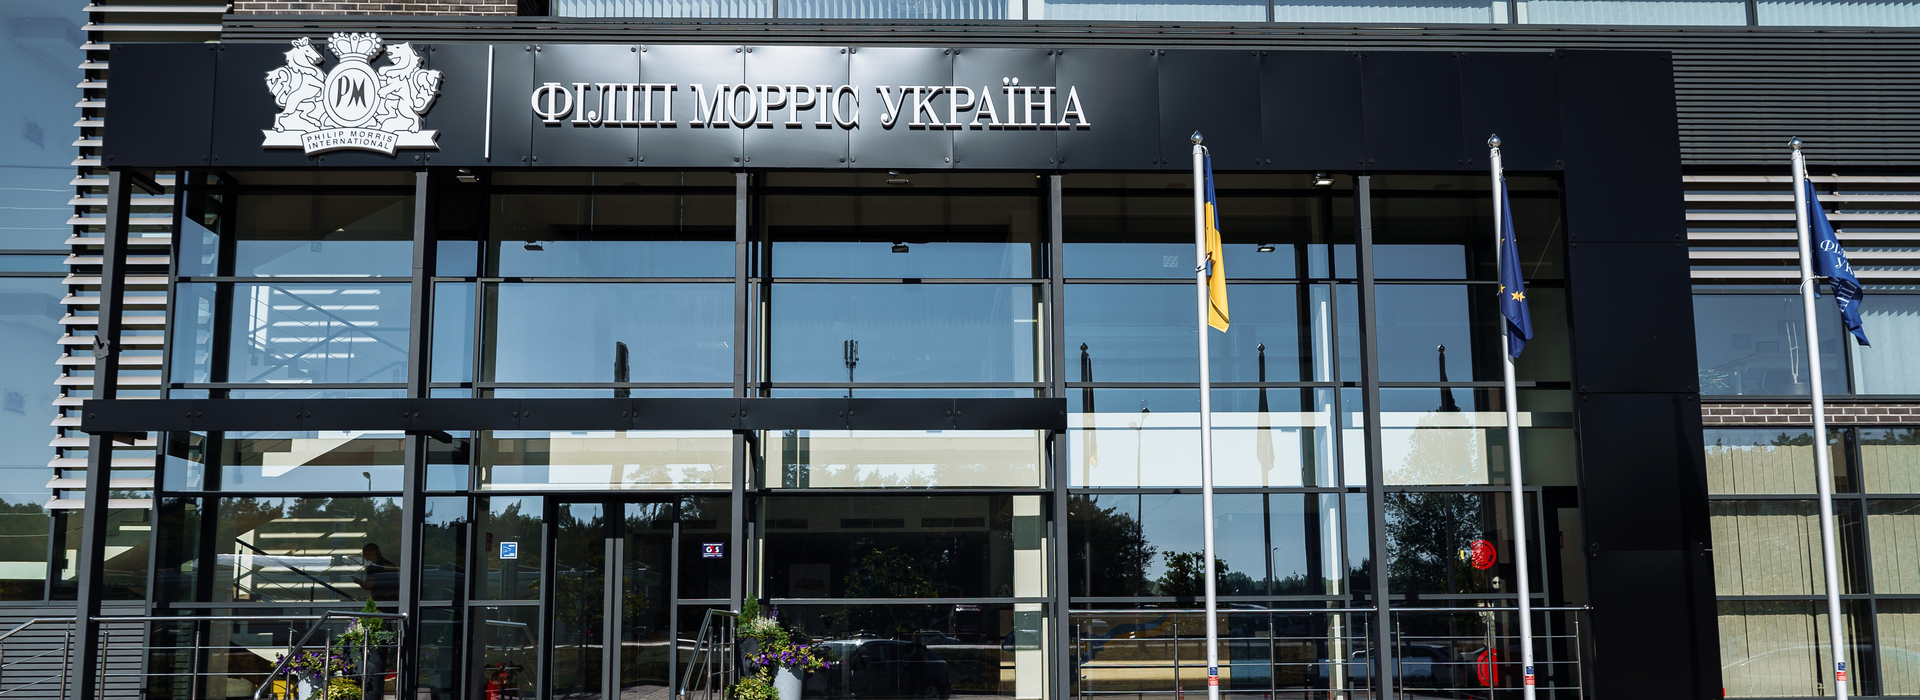 Philip Morris Launched a New Factory in the Lviv Region